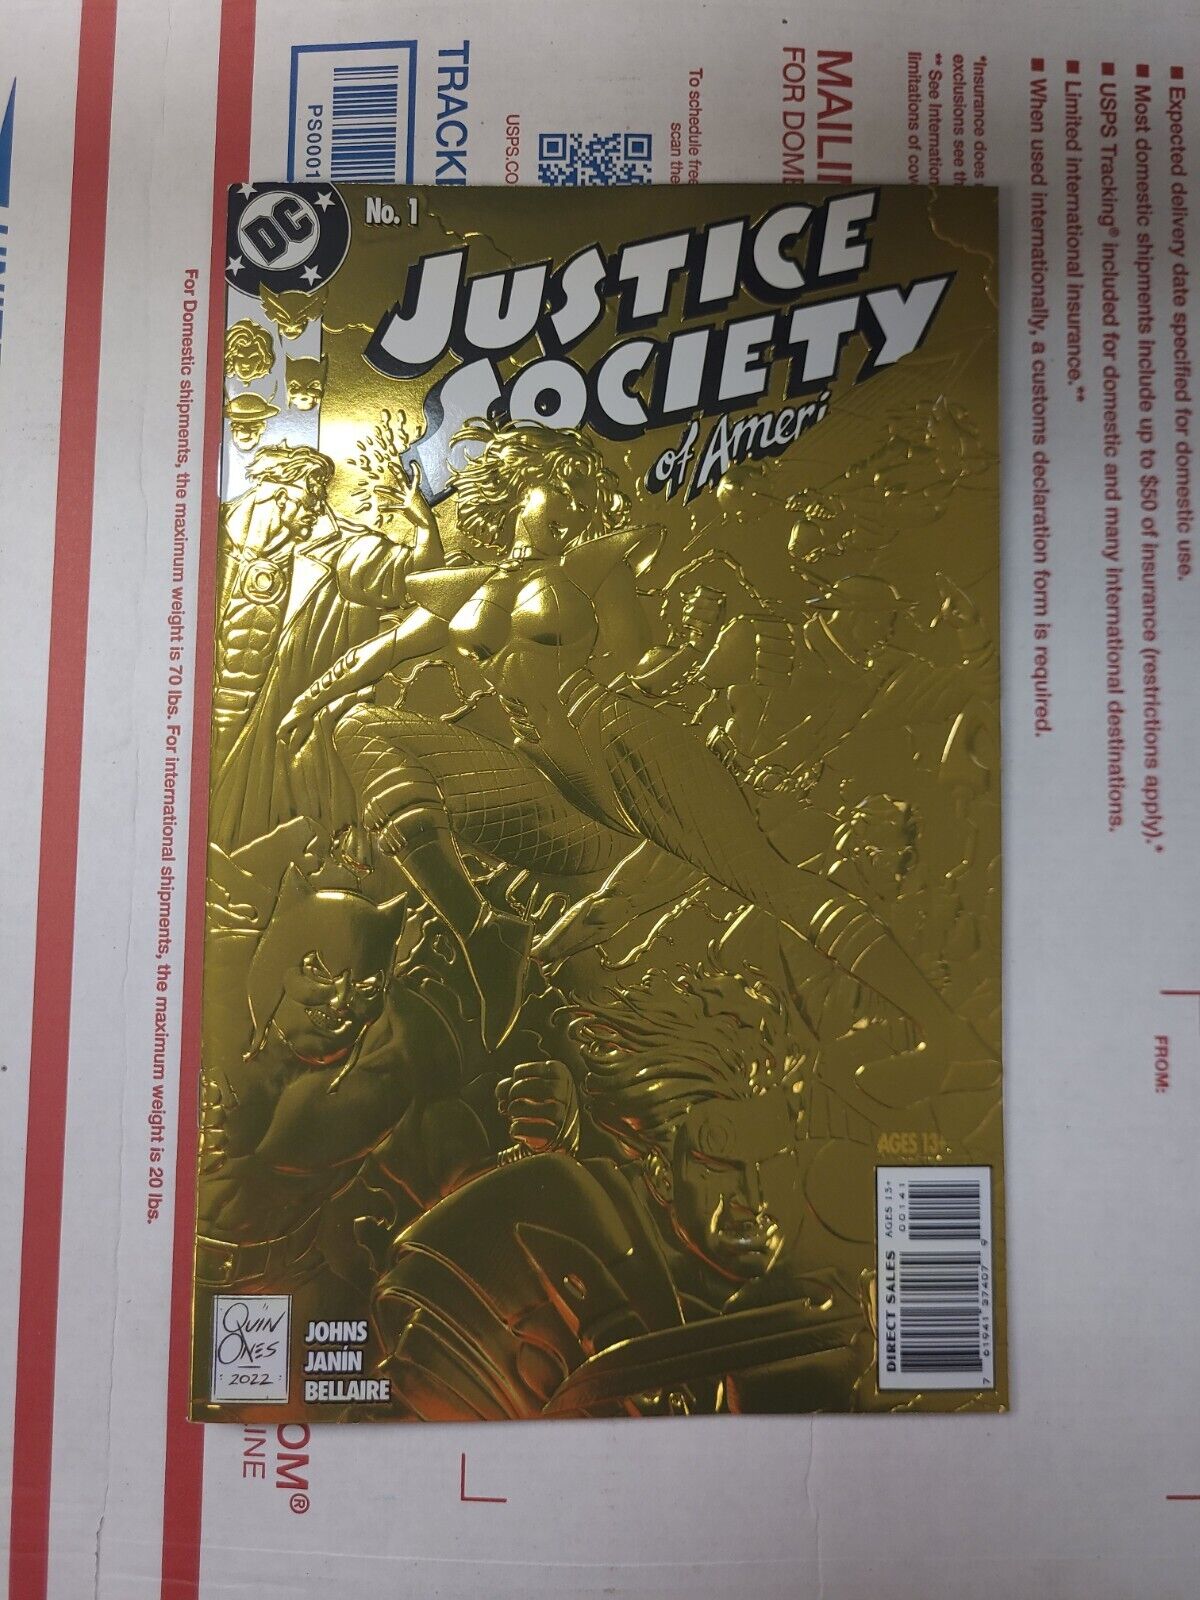 JUSTICE SOCIETY OF AMERICA #1 90S MONTH FOIL EMBOSSED VARIANT NM- OR BETTER JSA